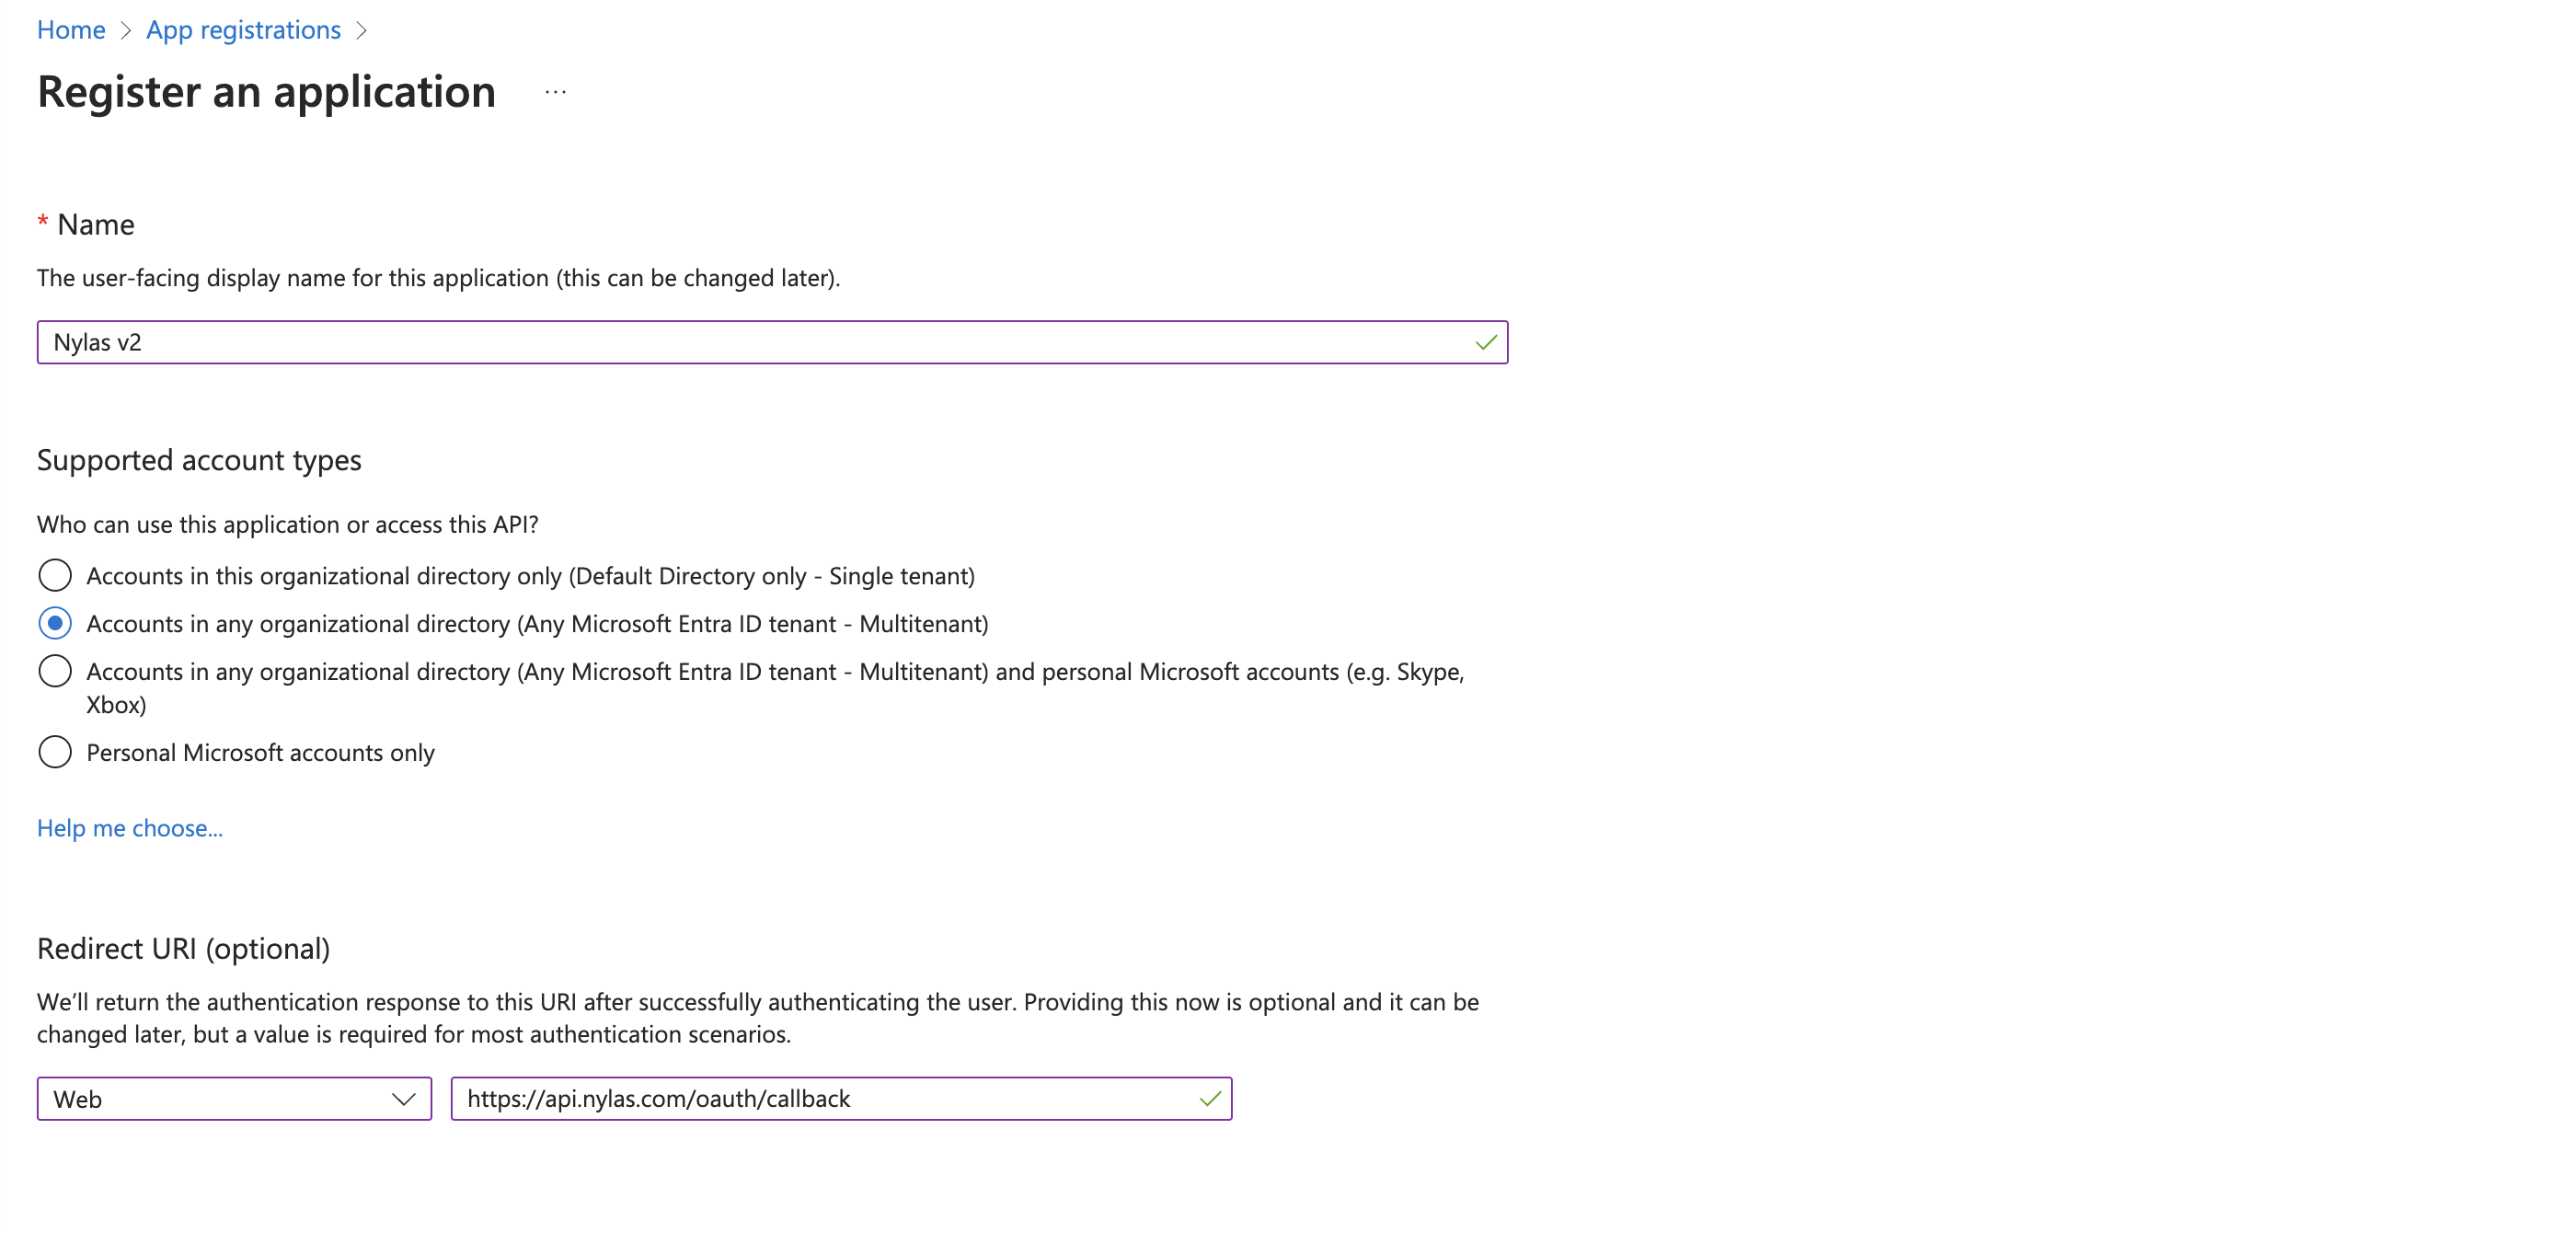 The Microsoft Azure Portal displaying the "Register an application" page. The "Accounts in any organizational directory and personal Microsoft accounts" is selected.